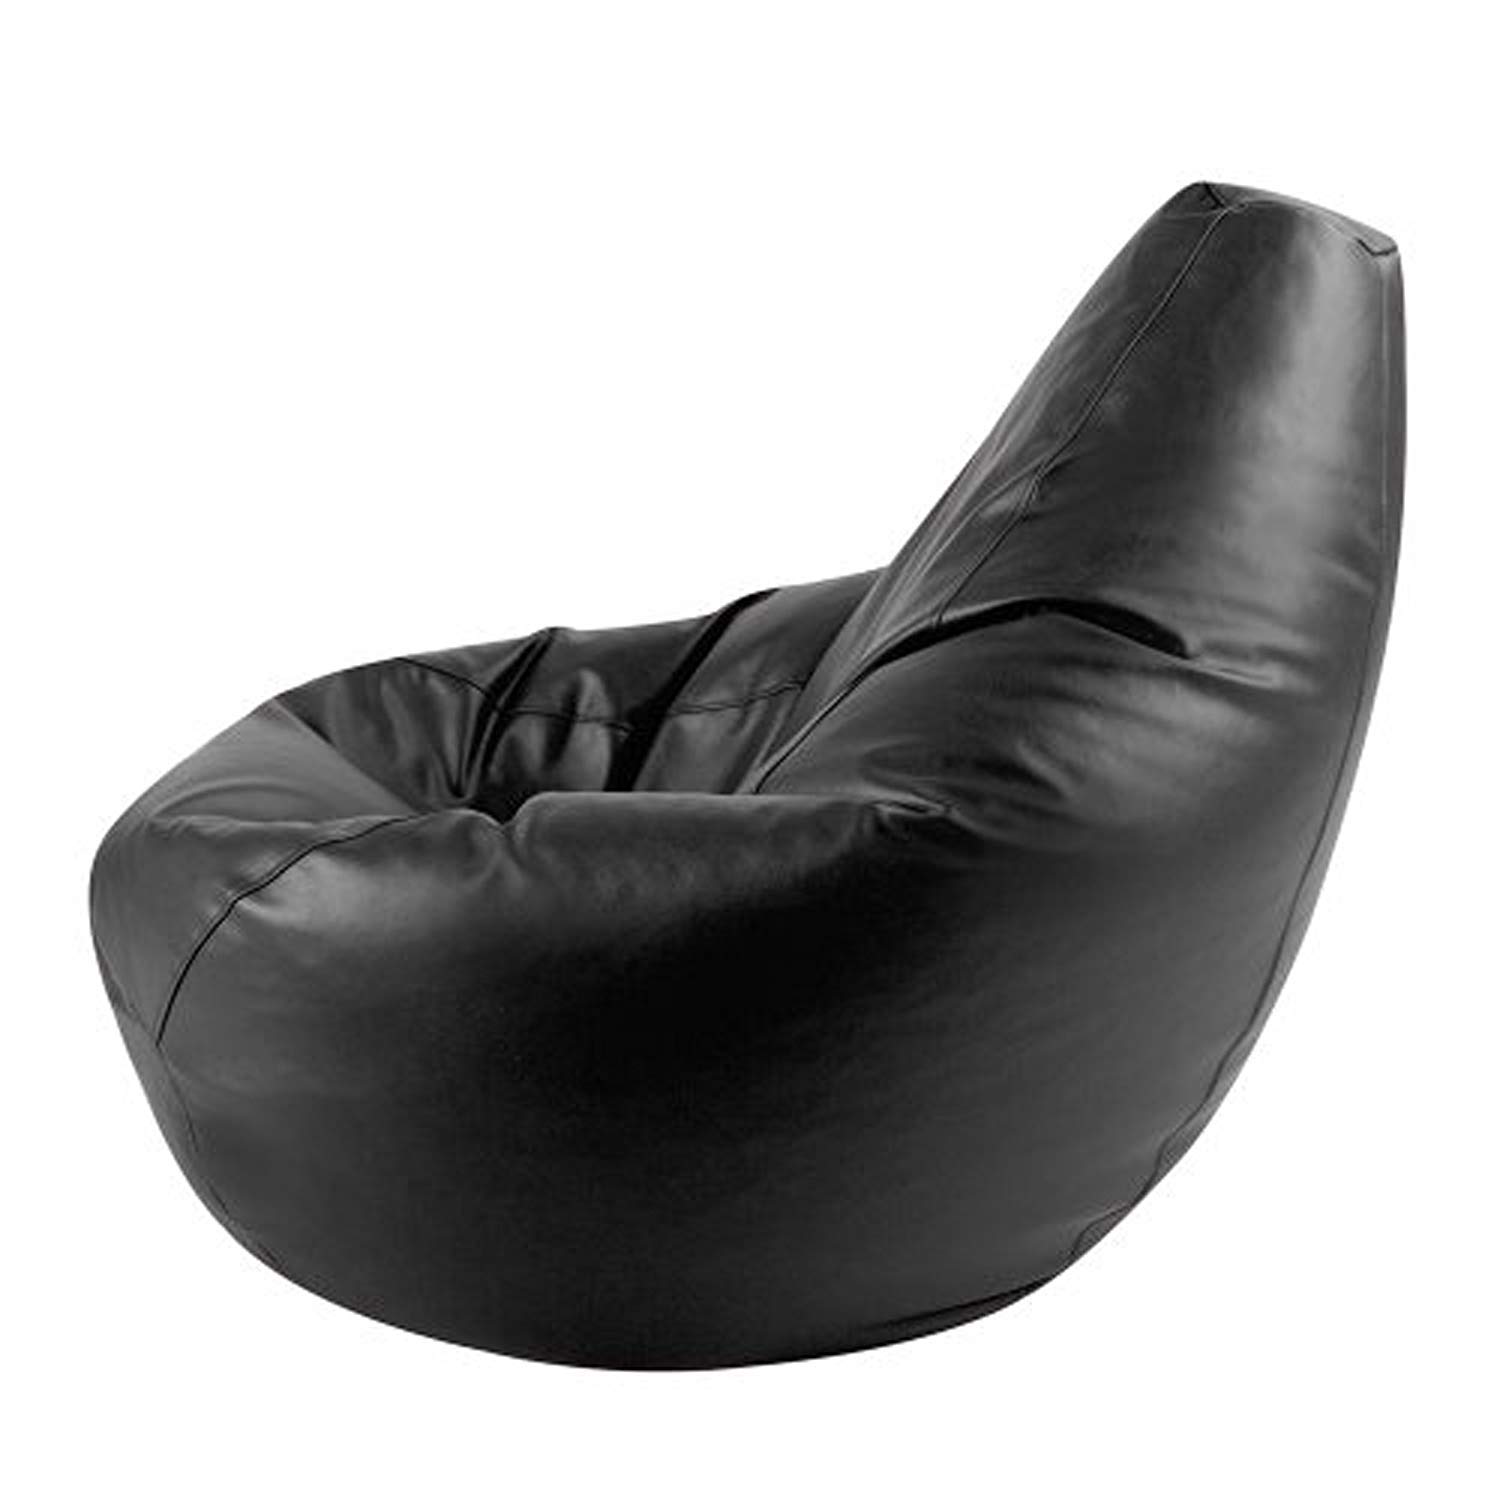 Buy Bean Bags Covers Online - Best Sitting Chairs